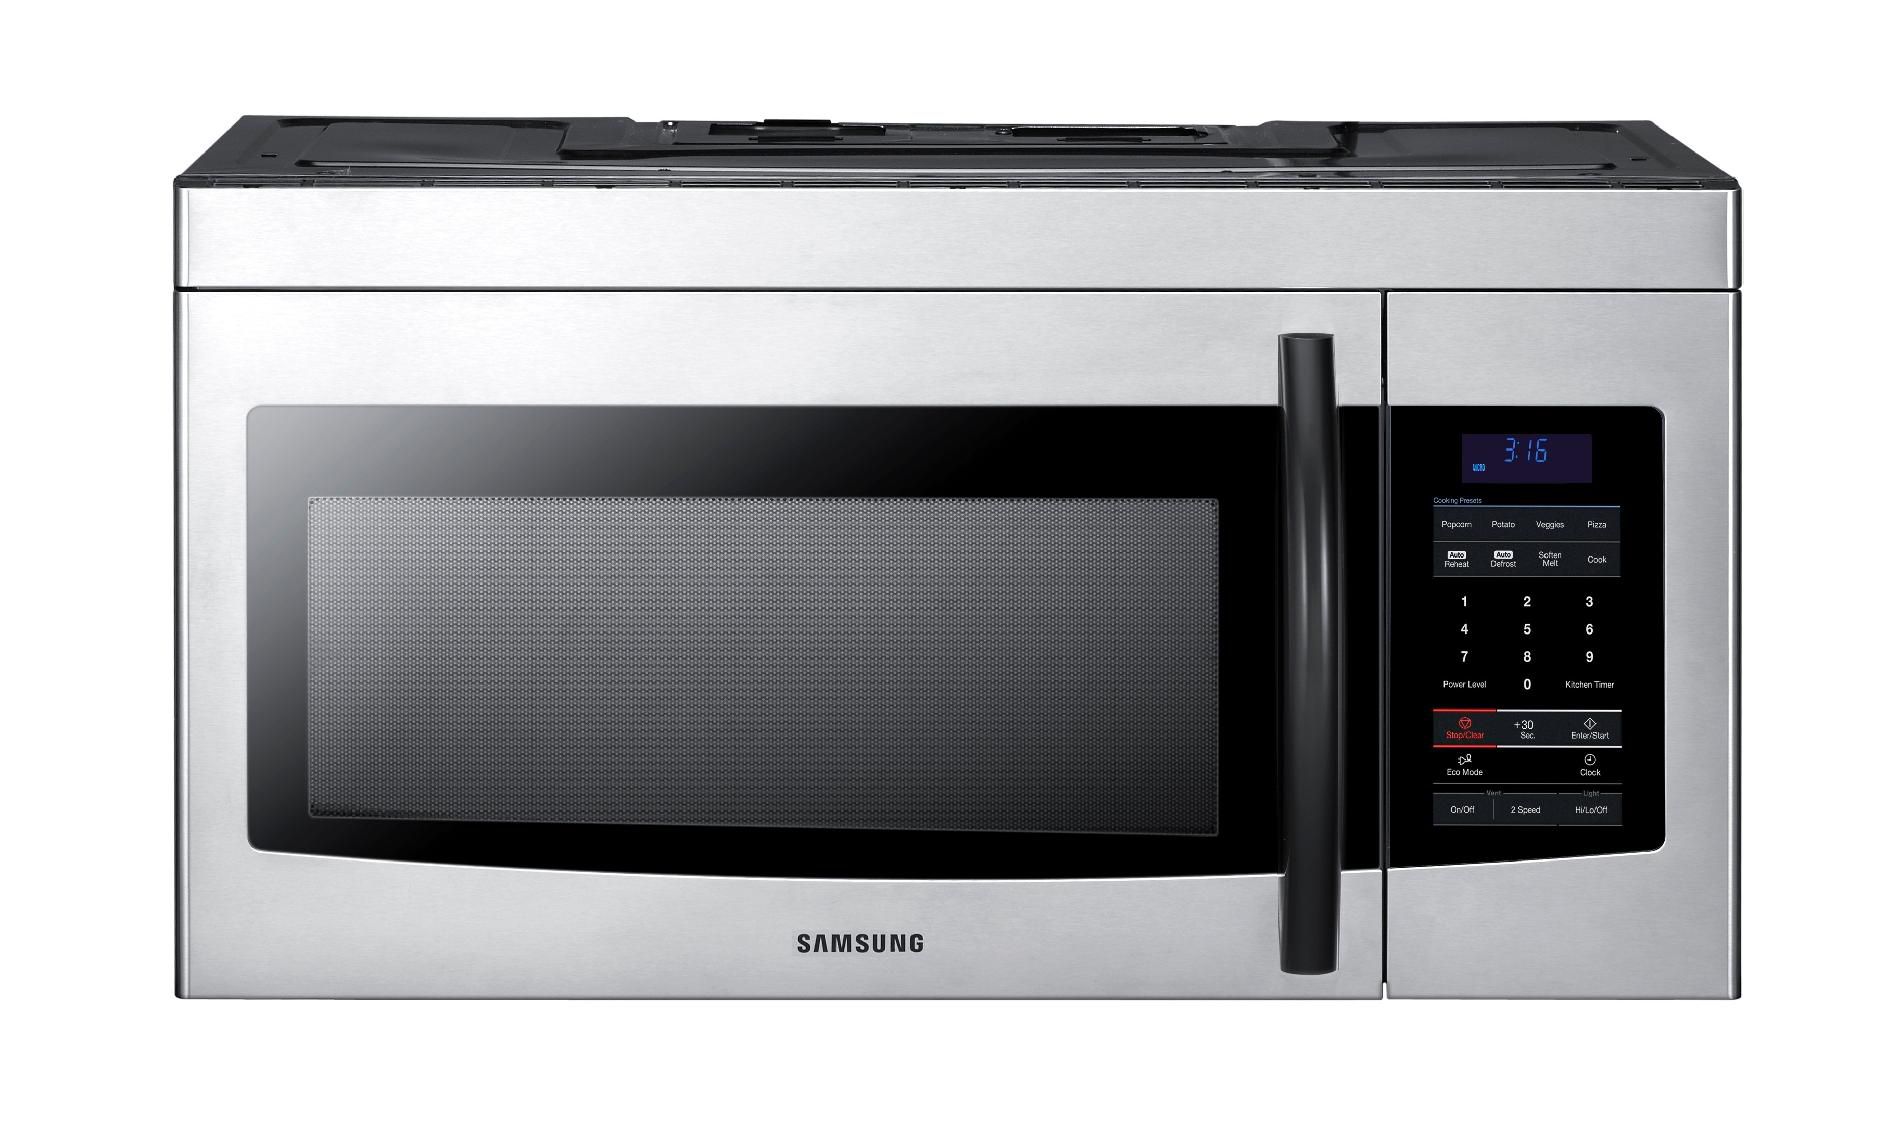 Samsung SMH1622S 1.6 cu. ft. Over-the-Range Microwave - Stainless Steel